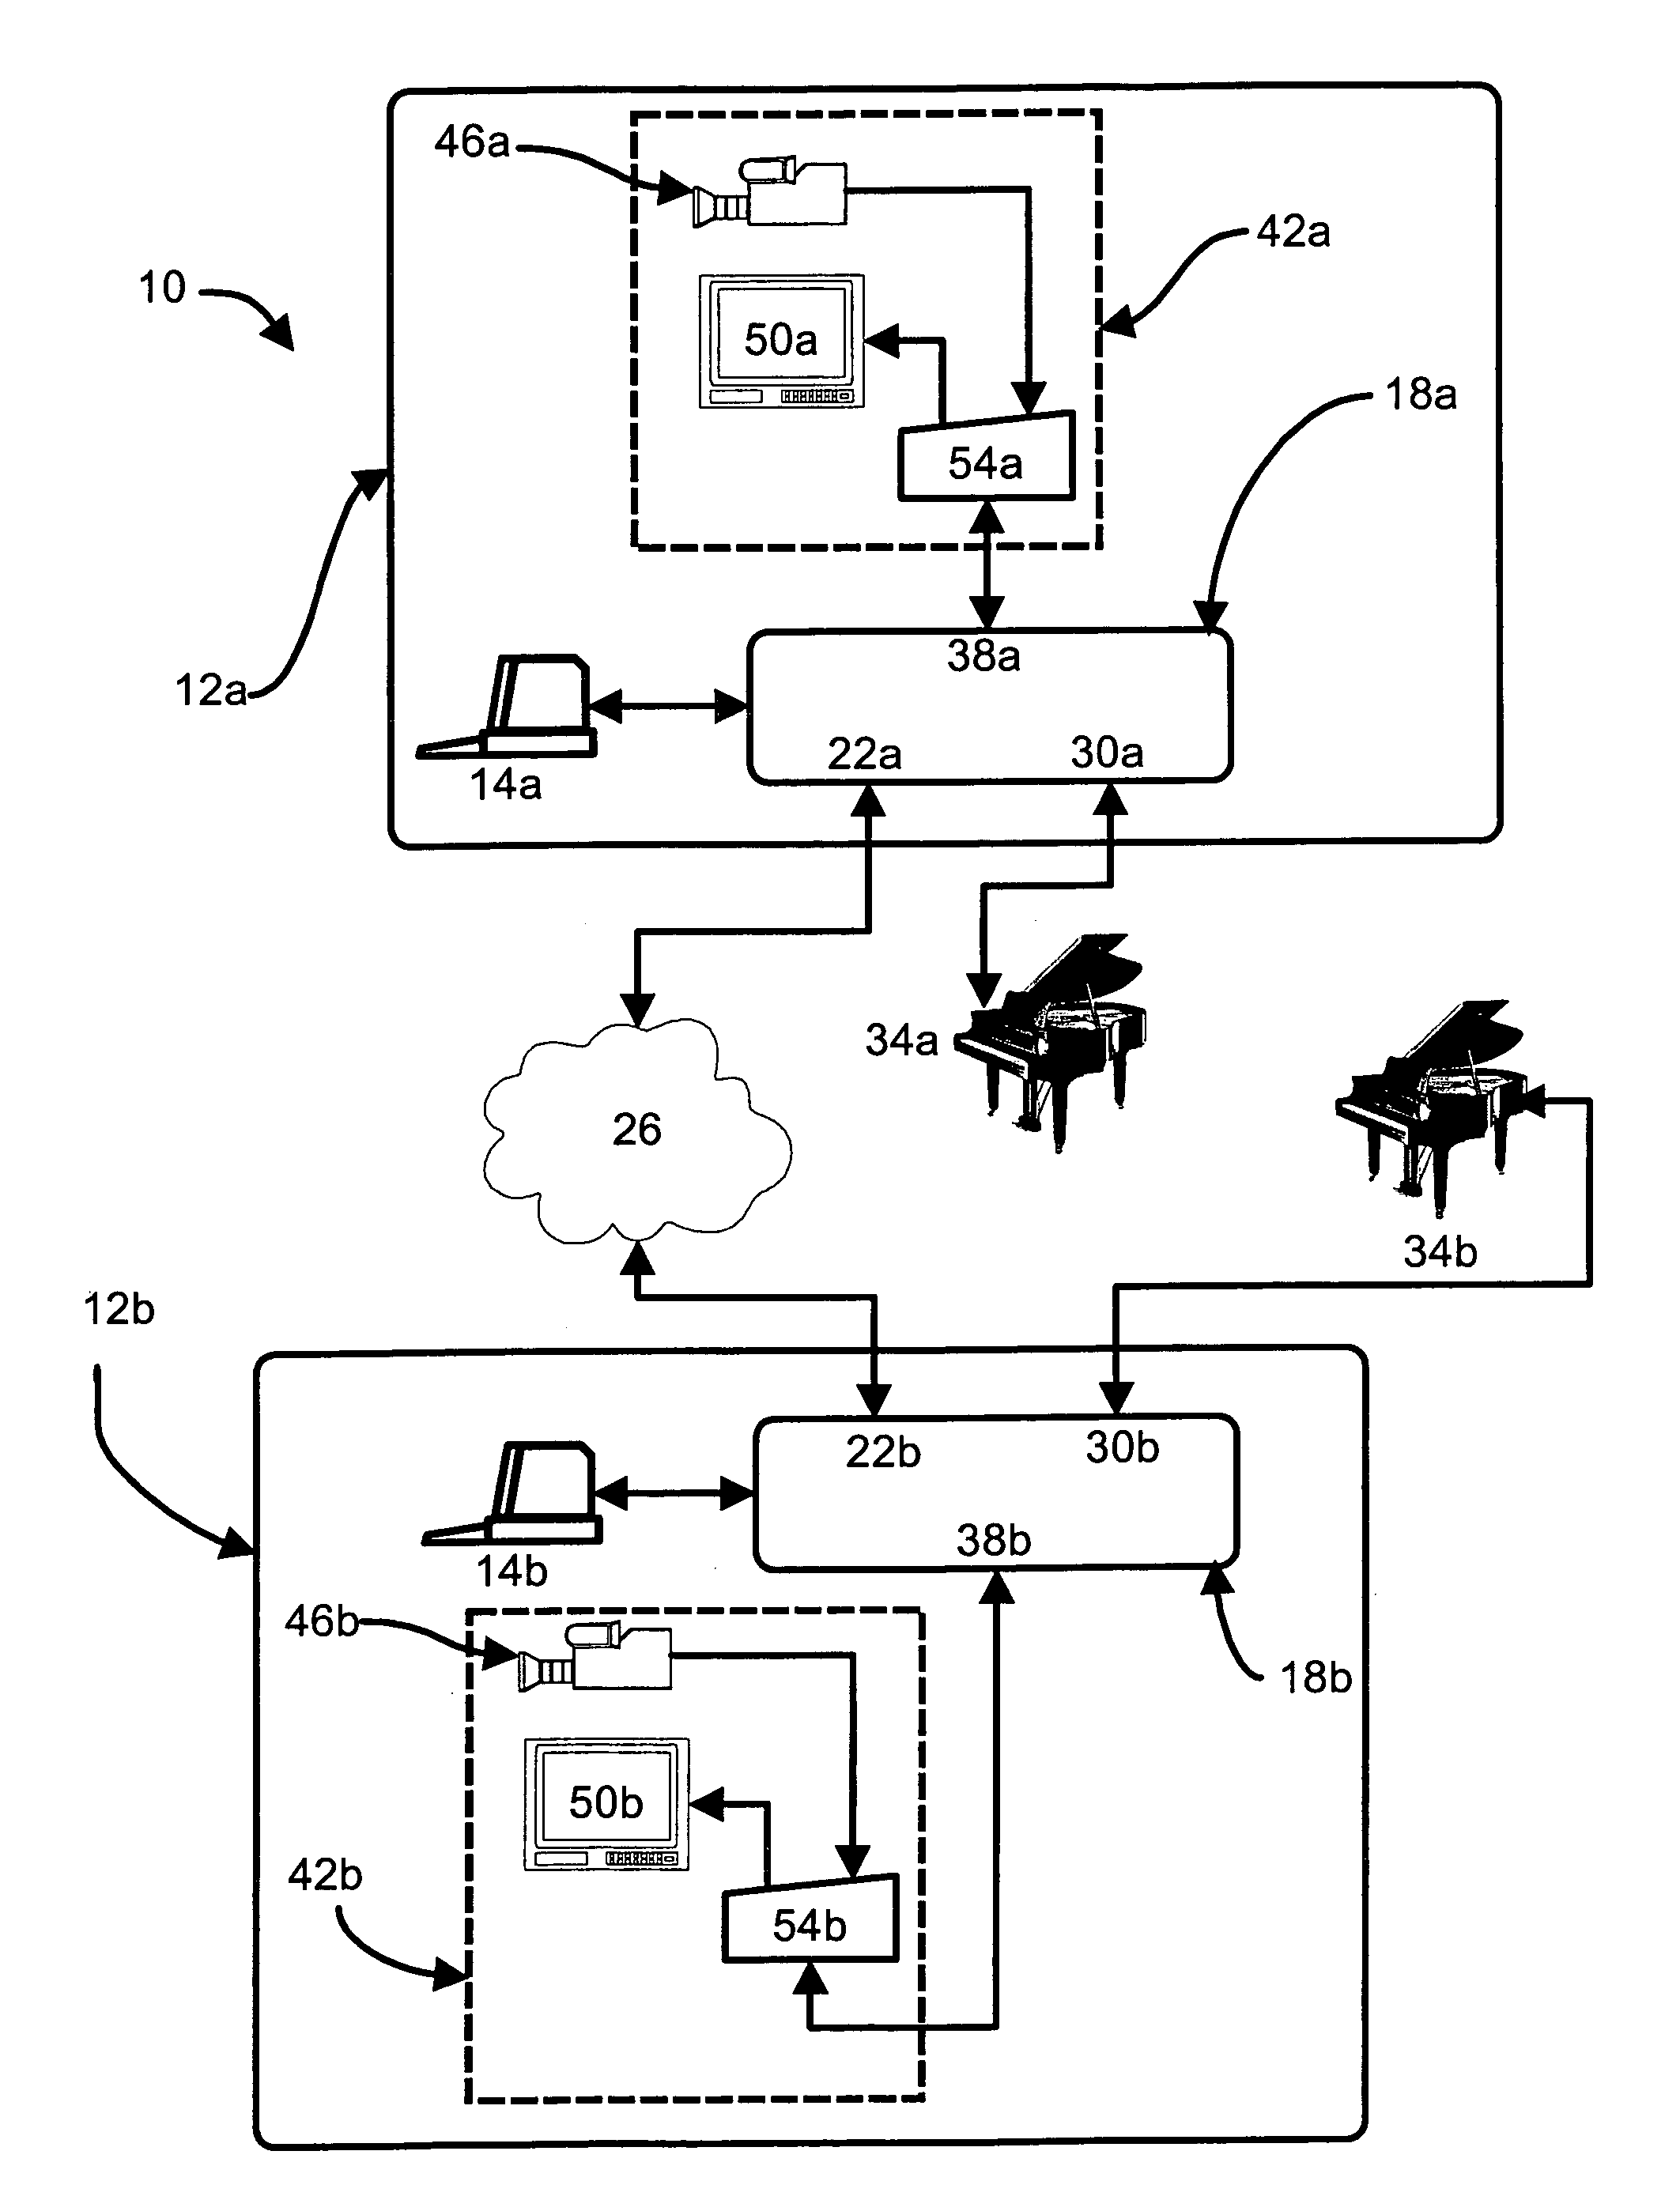 System and method for video assisted music instrument collaboration over distance